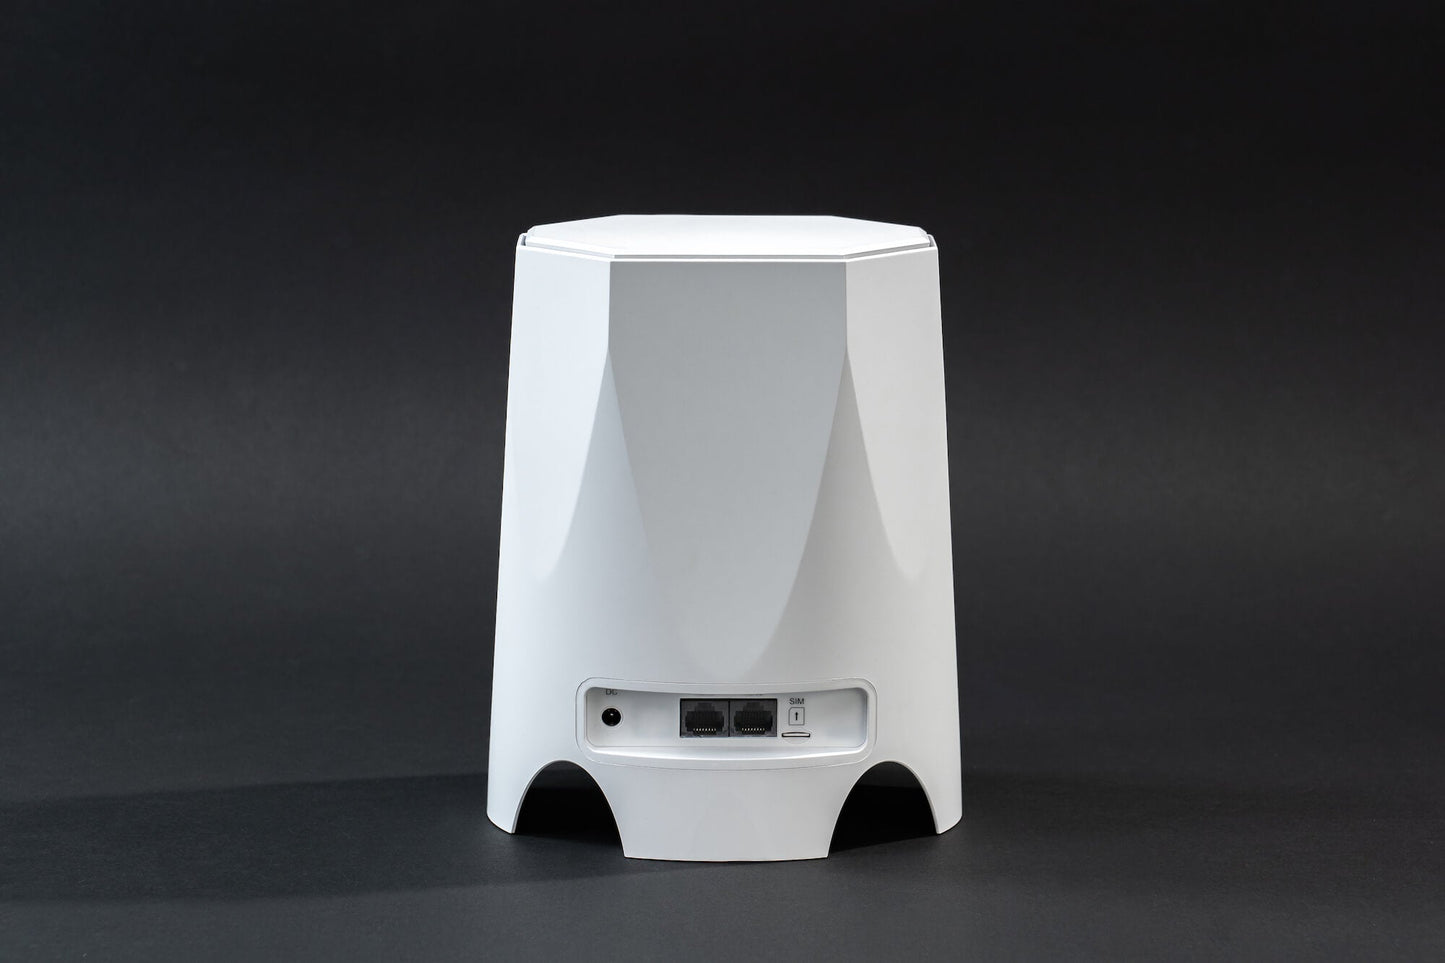 ATEL WB550 5G Indoor Fixed Wireless Access Router (Wholesale)